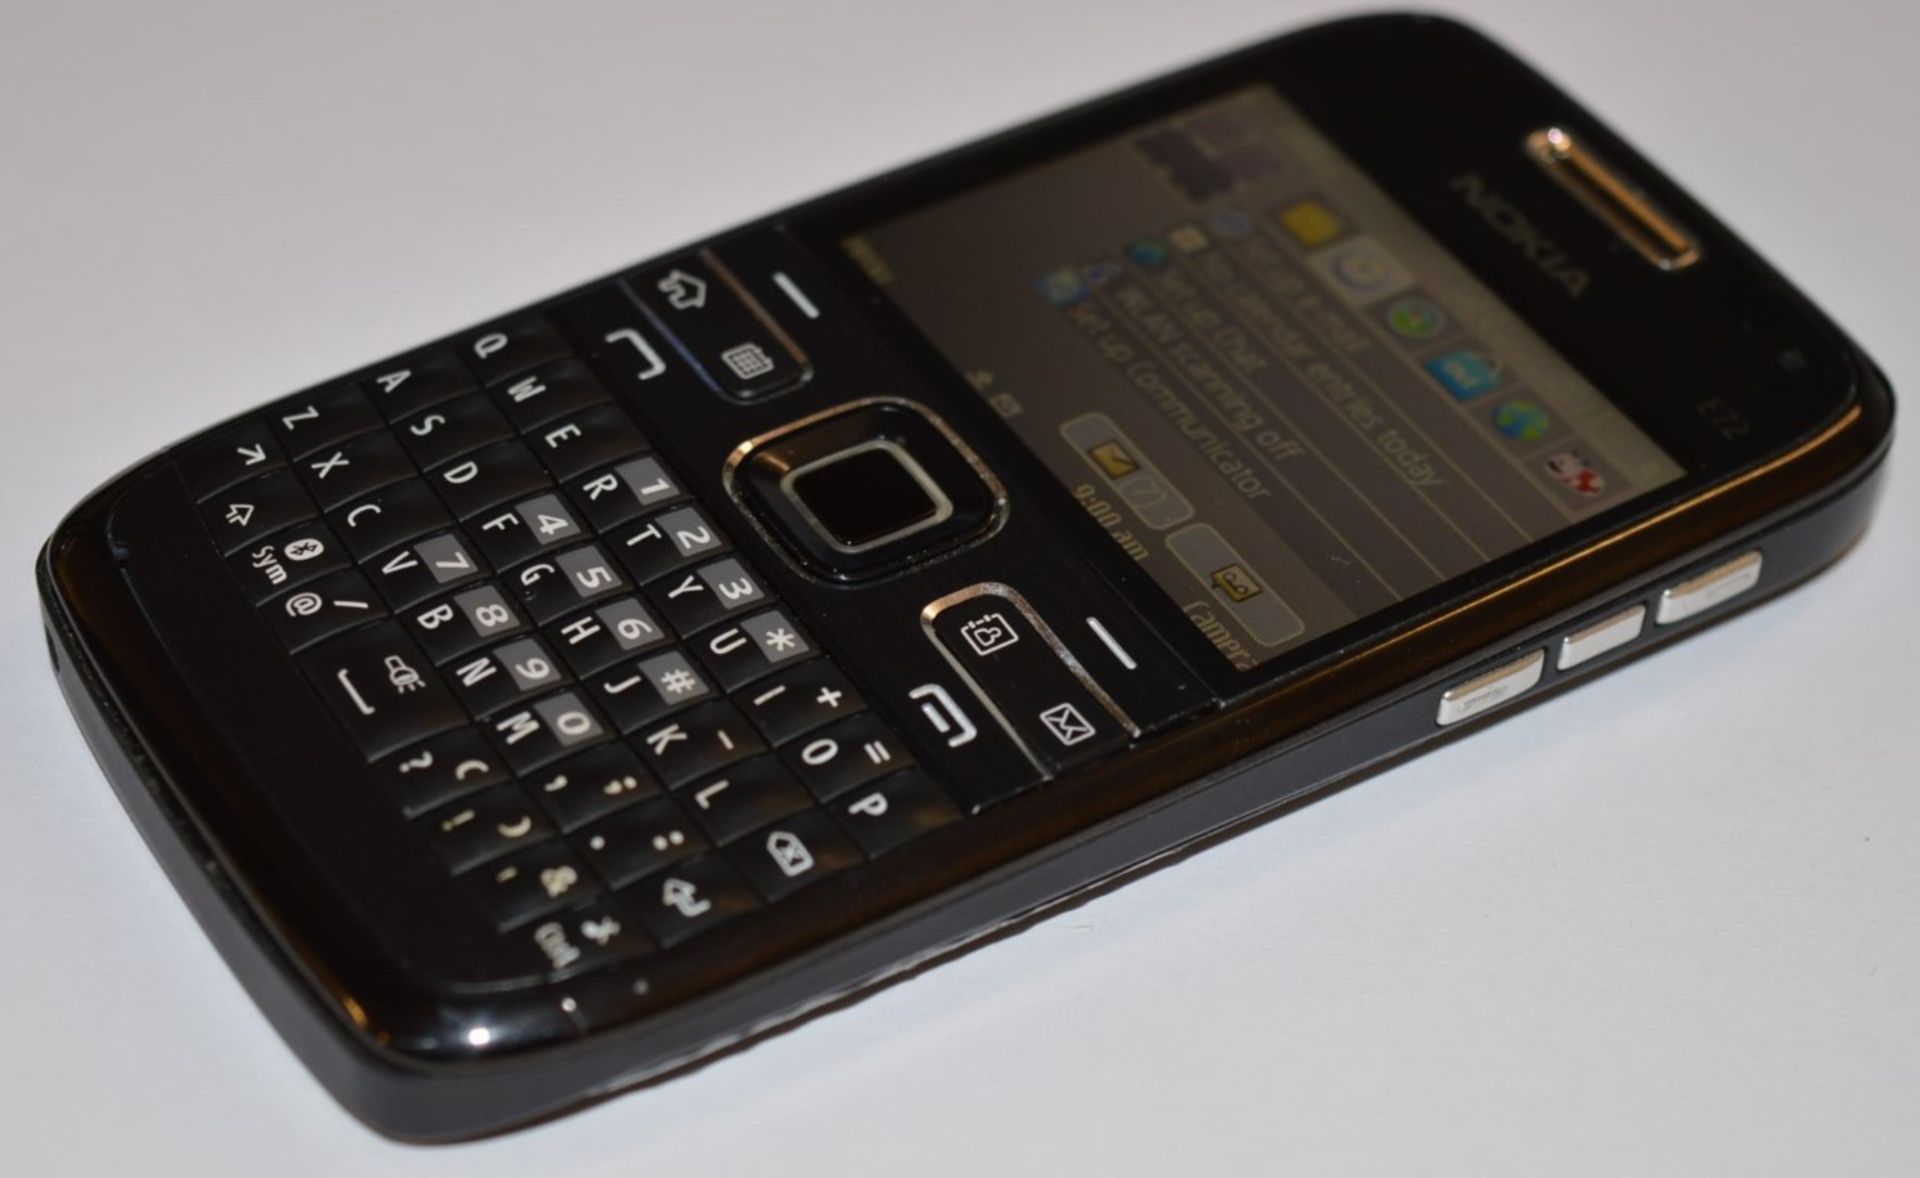 1 x Nokia E72 Mobile Phone Handset With Charger - Features Qwerty Keyboard, 600mhz CPU, 250mb Storag - Image 6 of 6